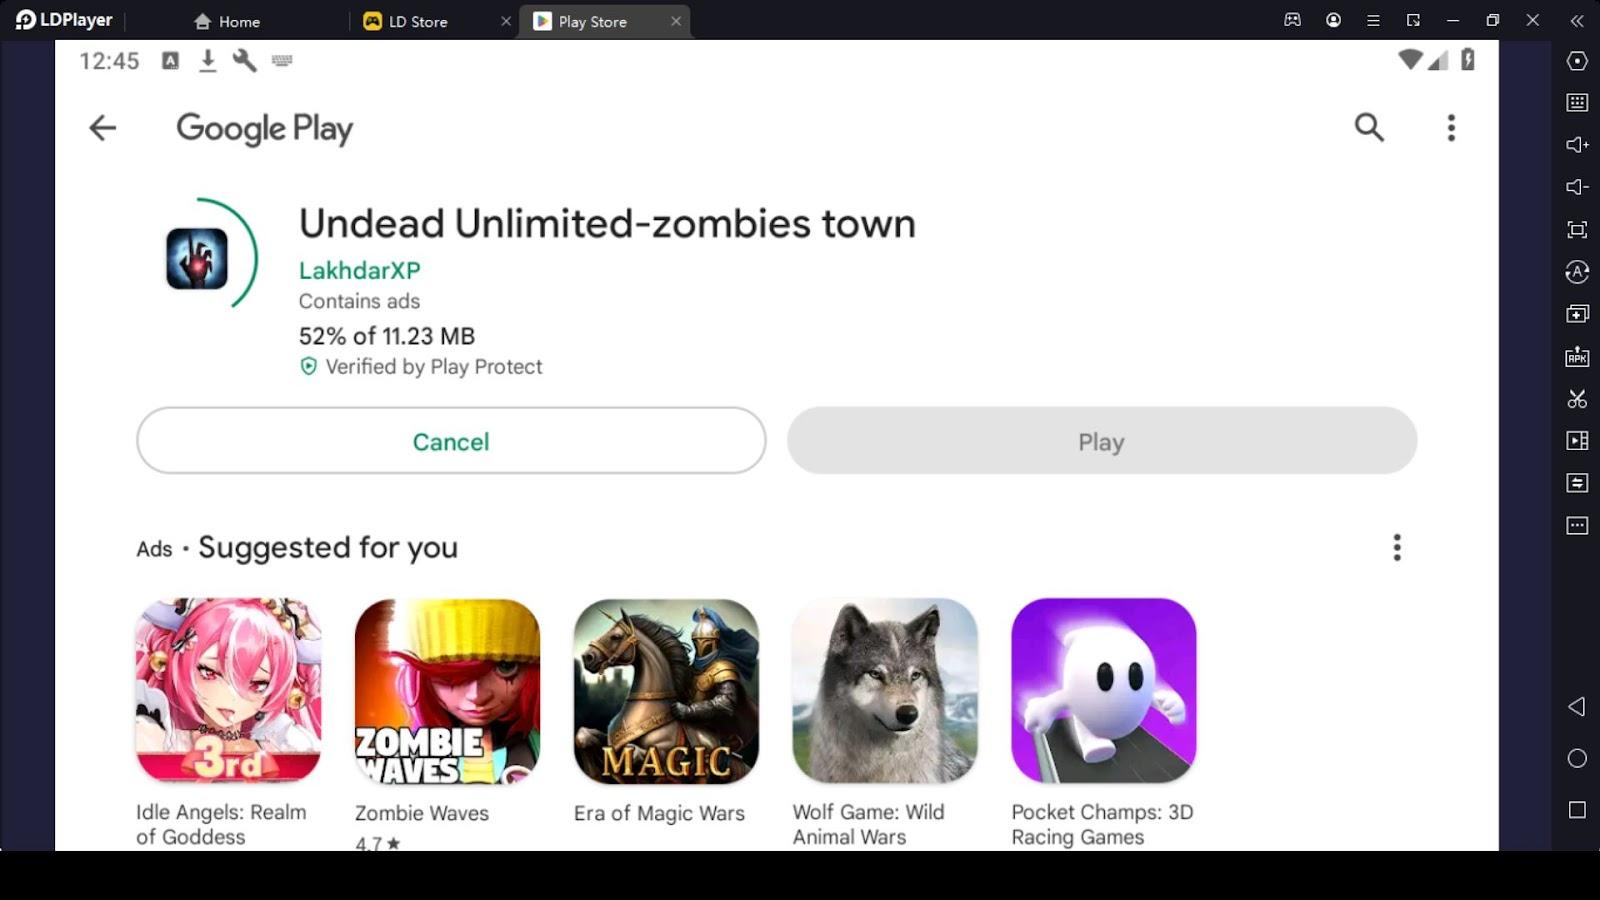 How to Run Undead Unlimited Through LDPlayer 9